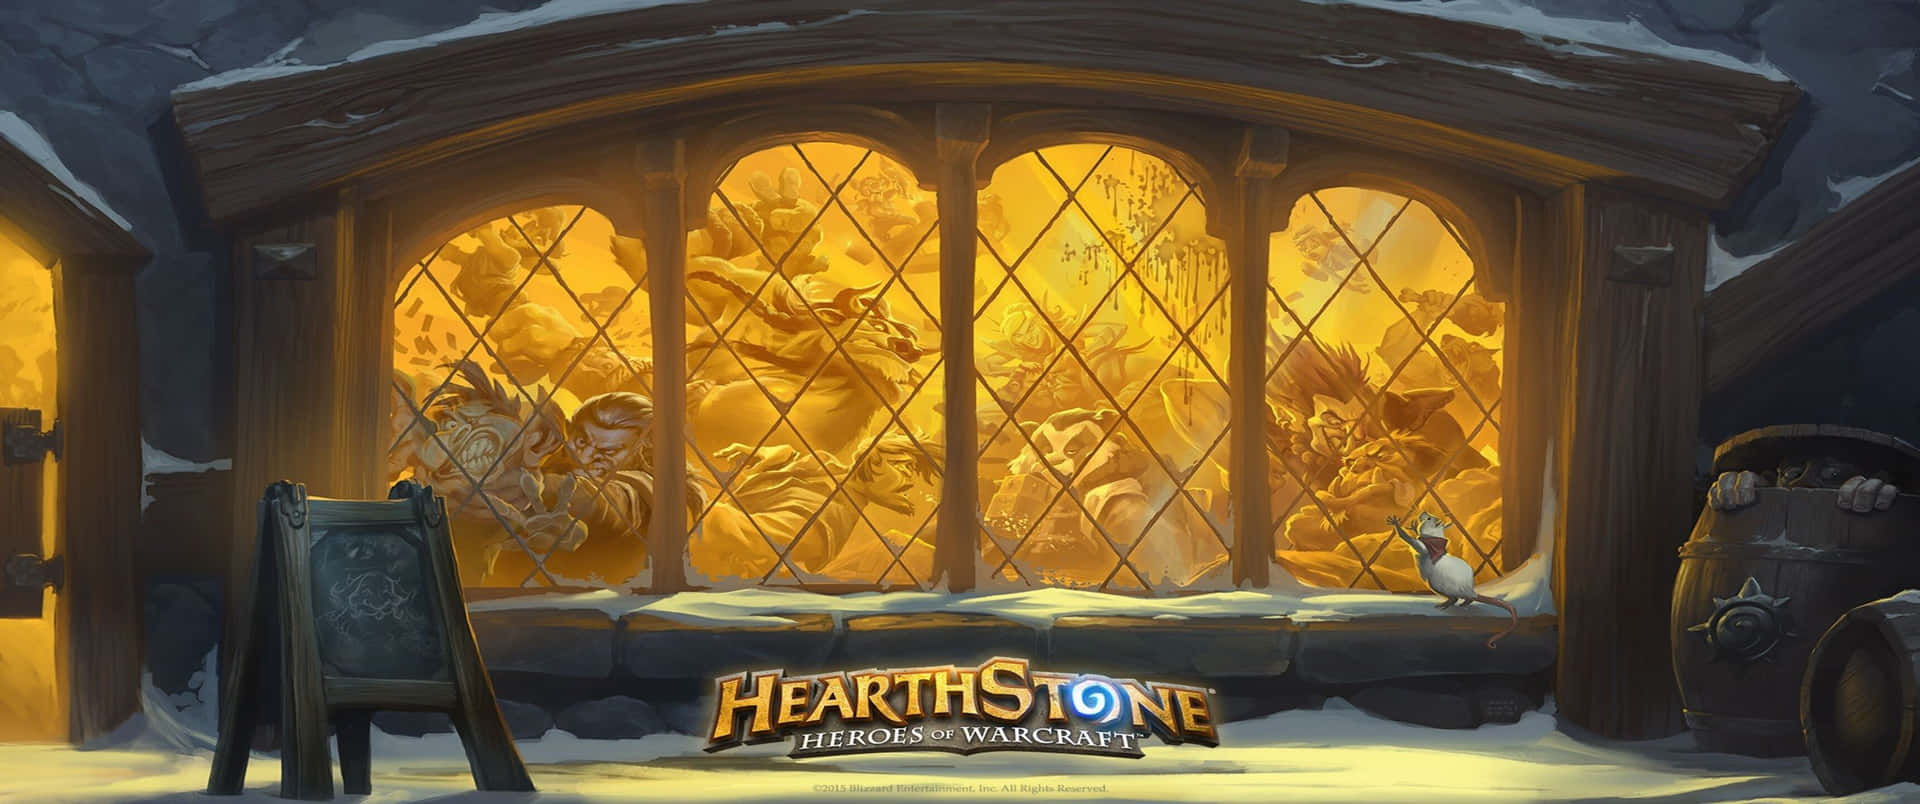 Wallpaper of a Hearthstone character in the 3440 x 1440p resolution